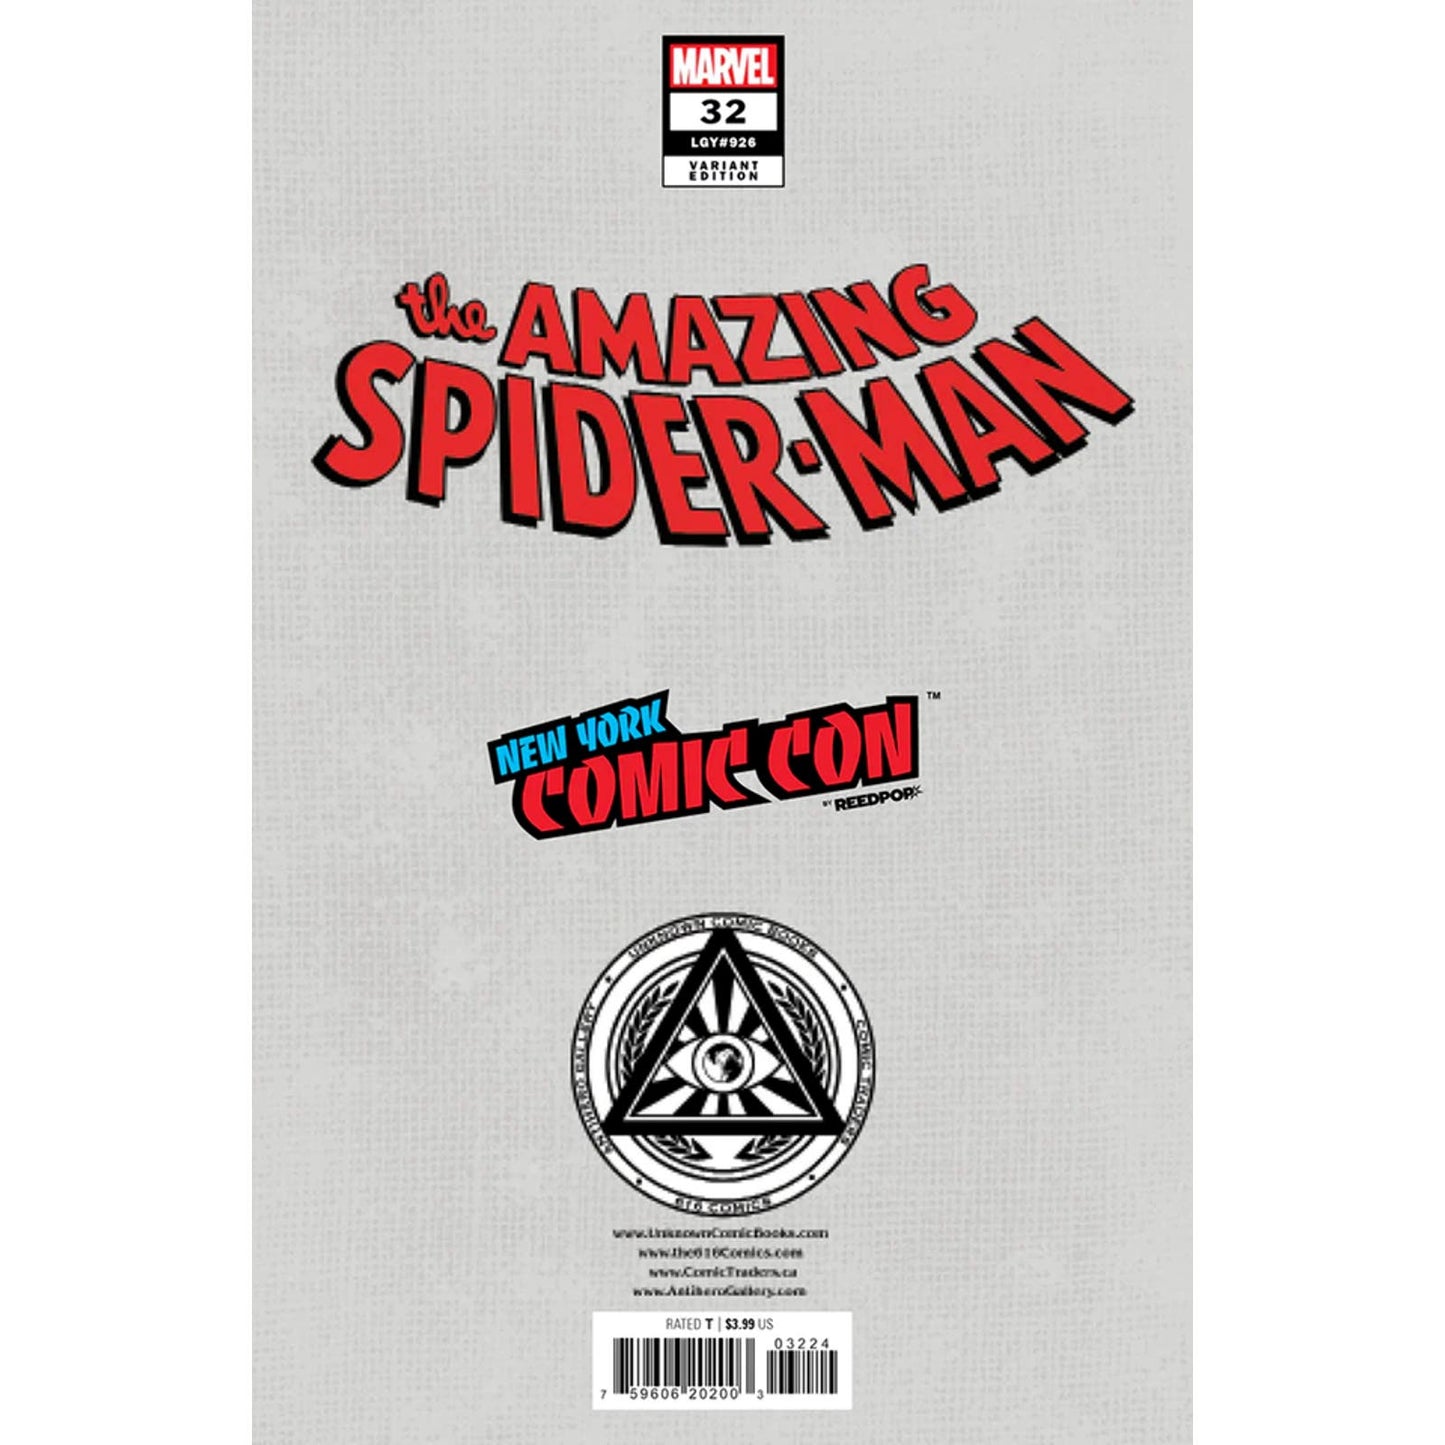 [FOIL] AMAZING SPIDER-MAN #32 [G.O.D.S.] UNKNOWN COMICS LEIRIX EXCLUSIVE NYCC FO